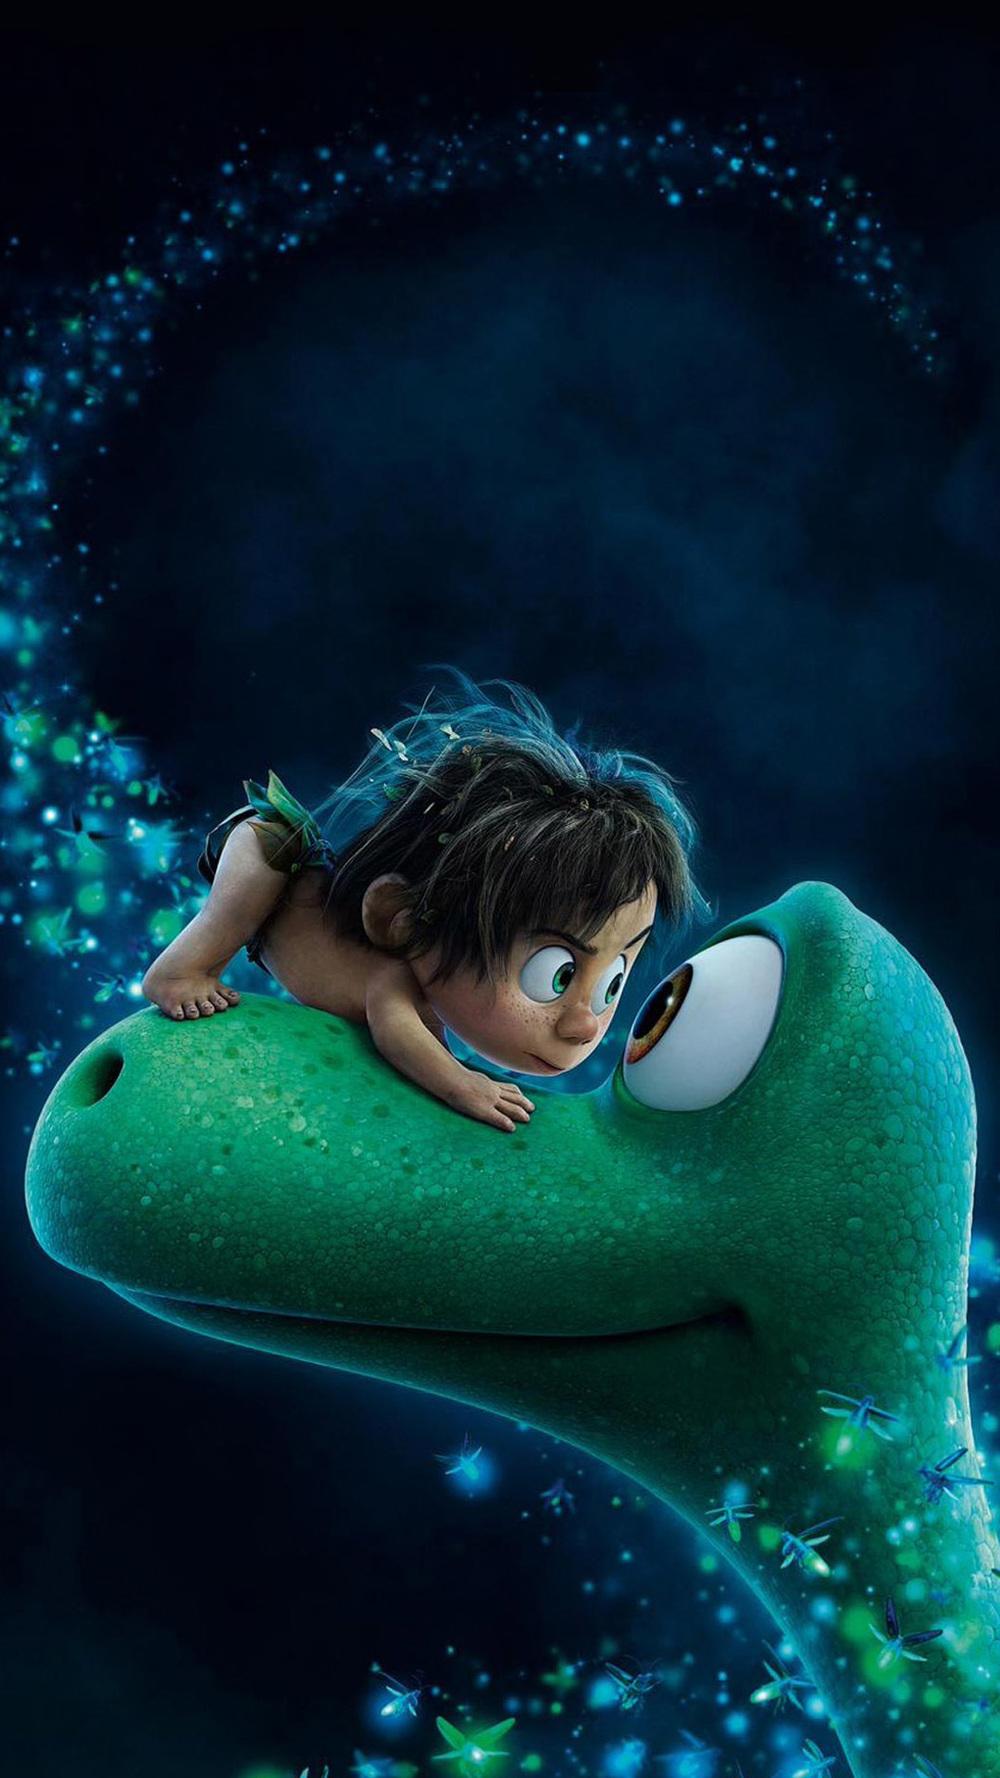 The Good Dinosaur: Downloadable Wallpaper for iOS & Android